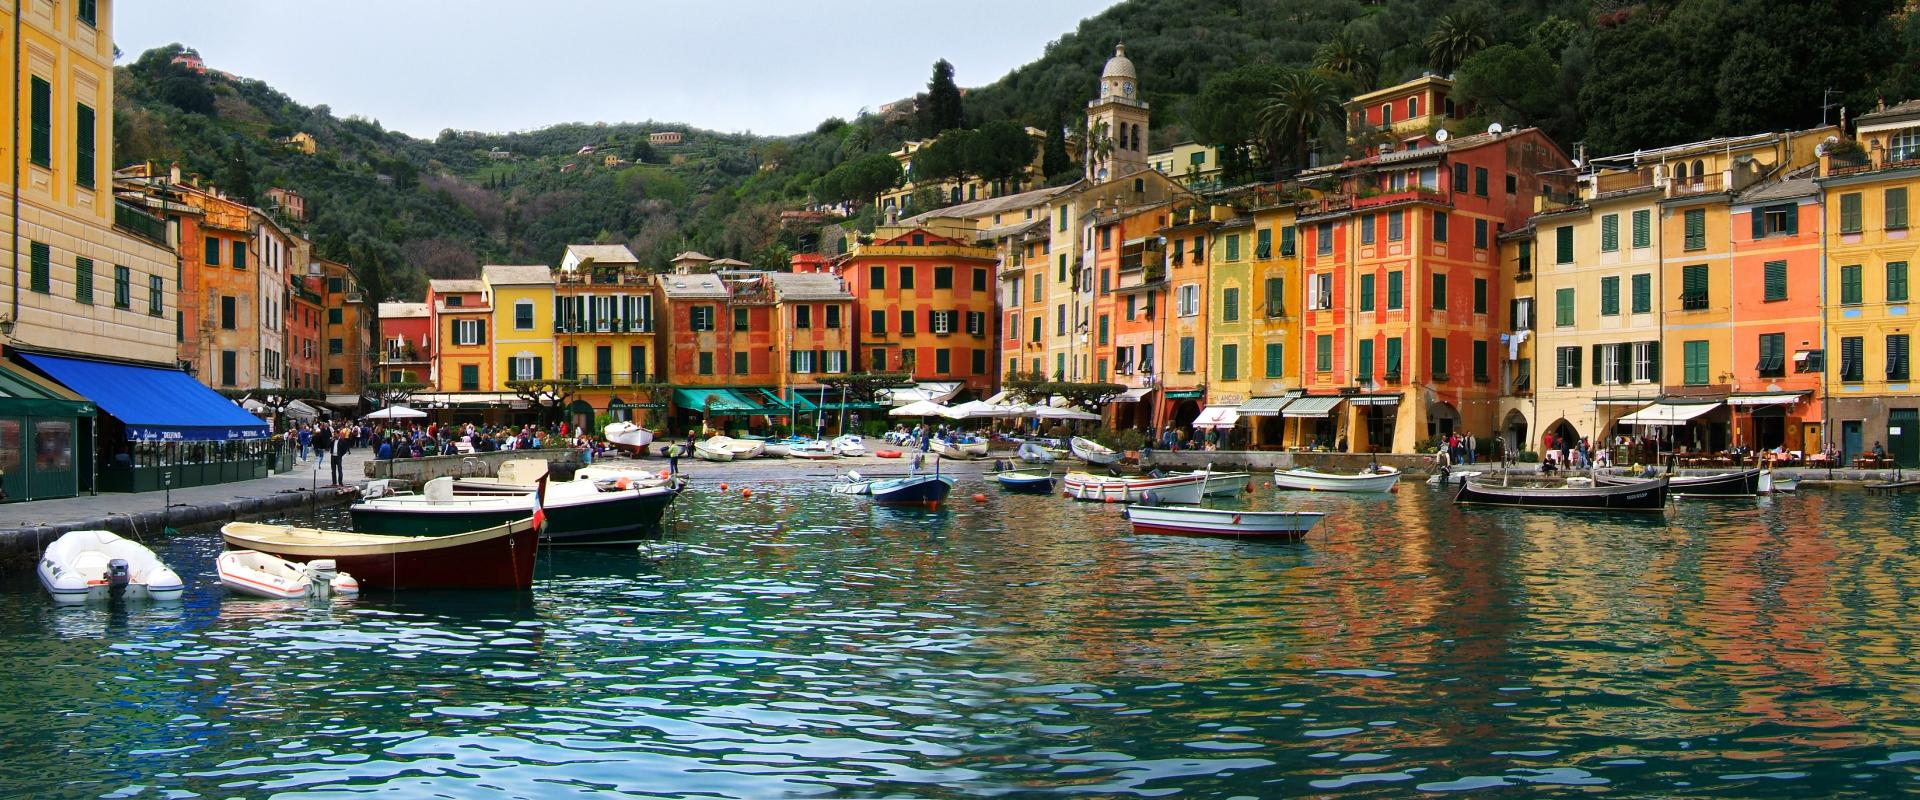 Guided tour of Portofino, cooking exhibition and tasting lunch